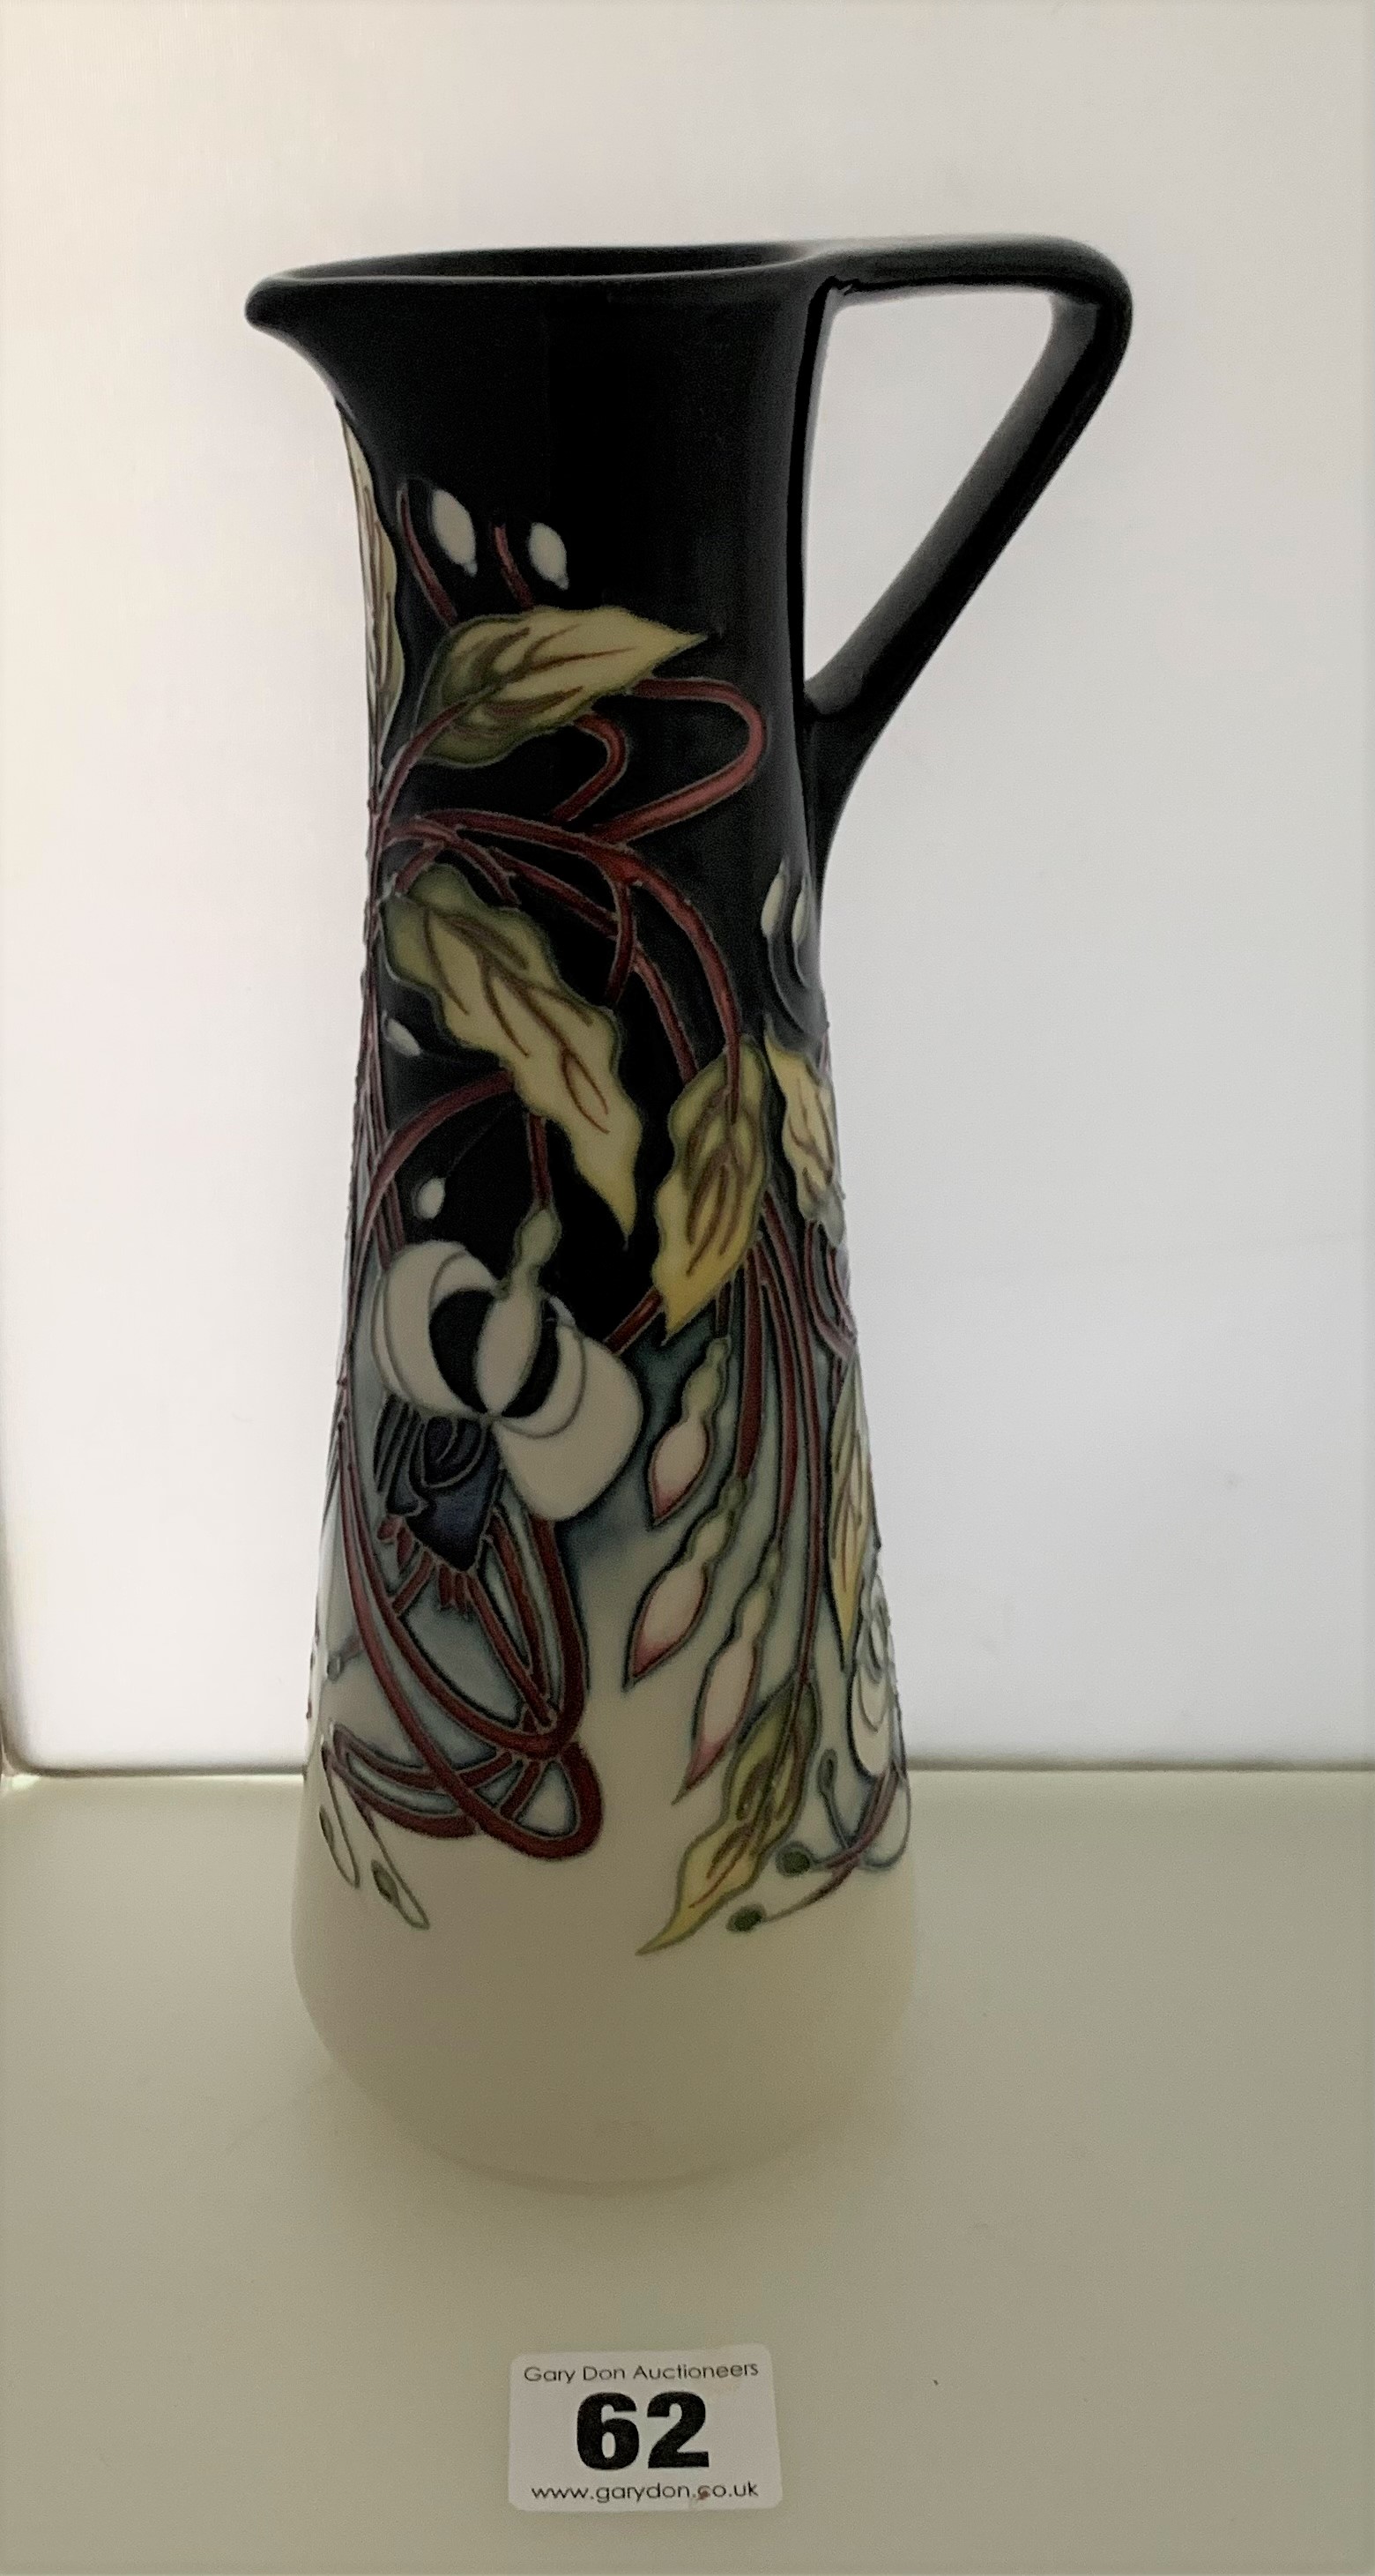 Blue Moorcroft jug, signed and dated 2012, 66/75, 9.5” high